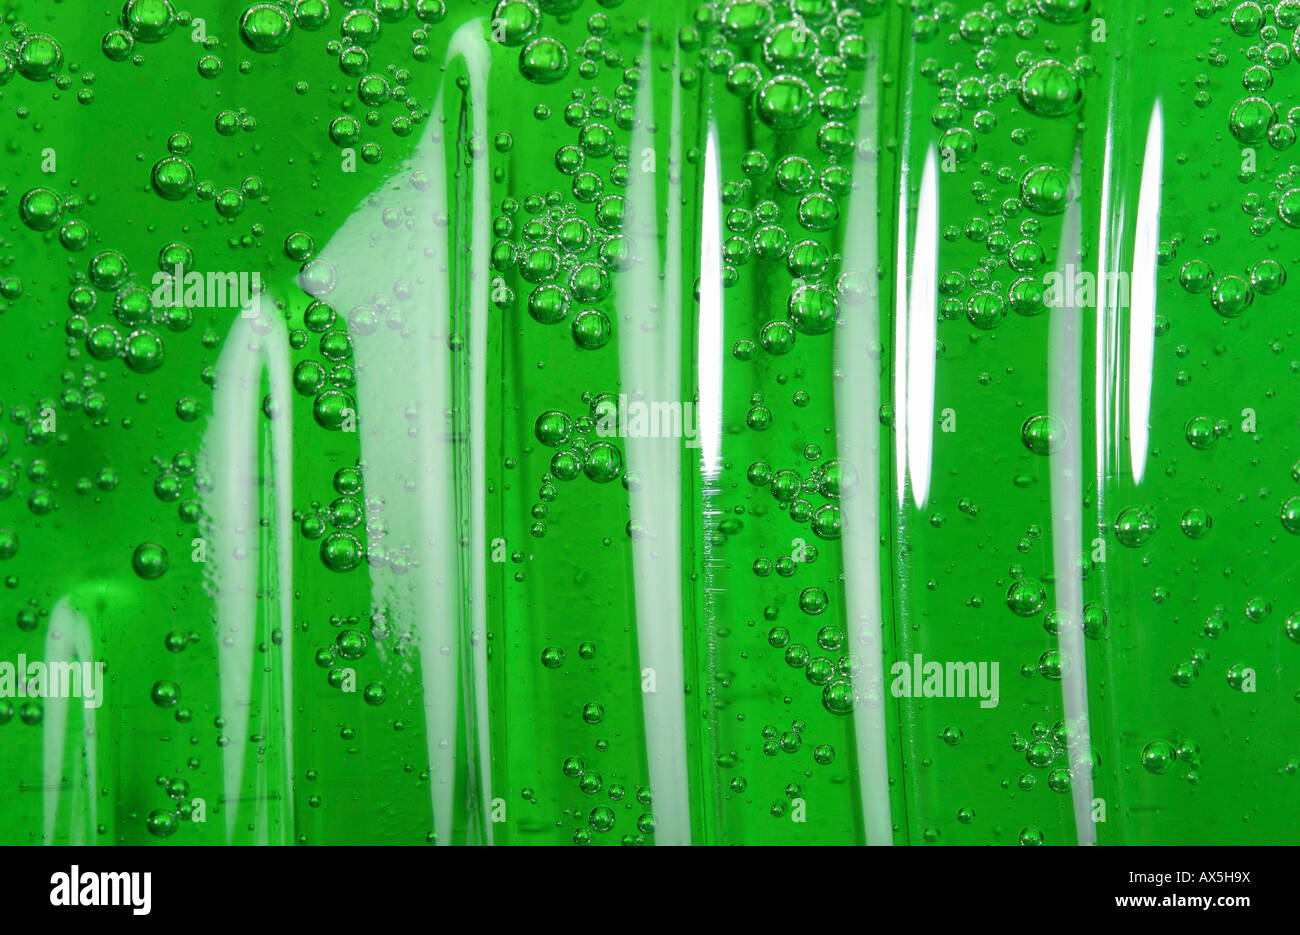 Washing up liquid with green cleaning liquid and air bubbles Stock Photo